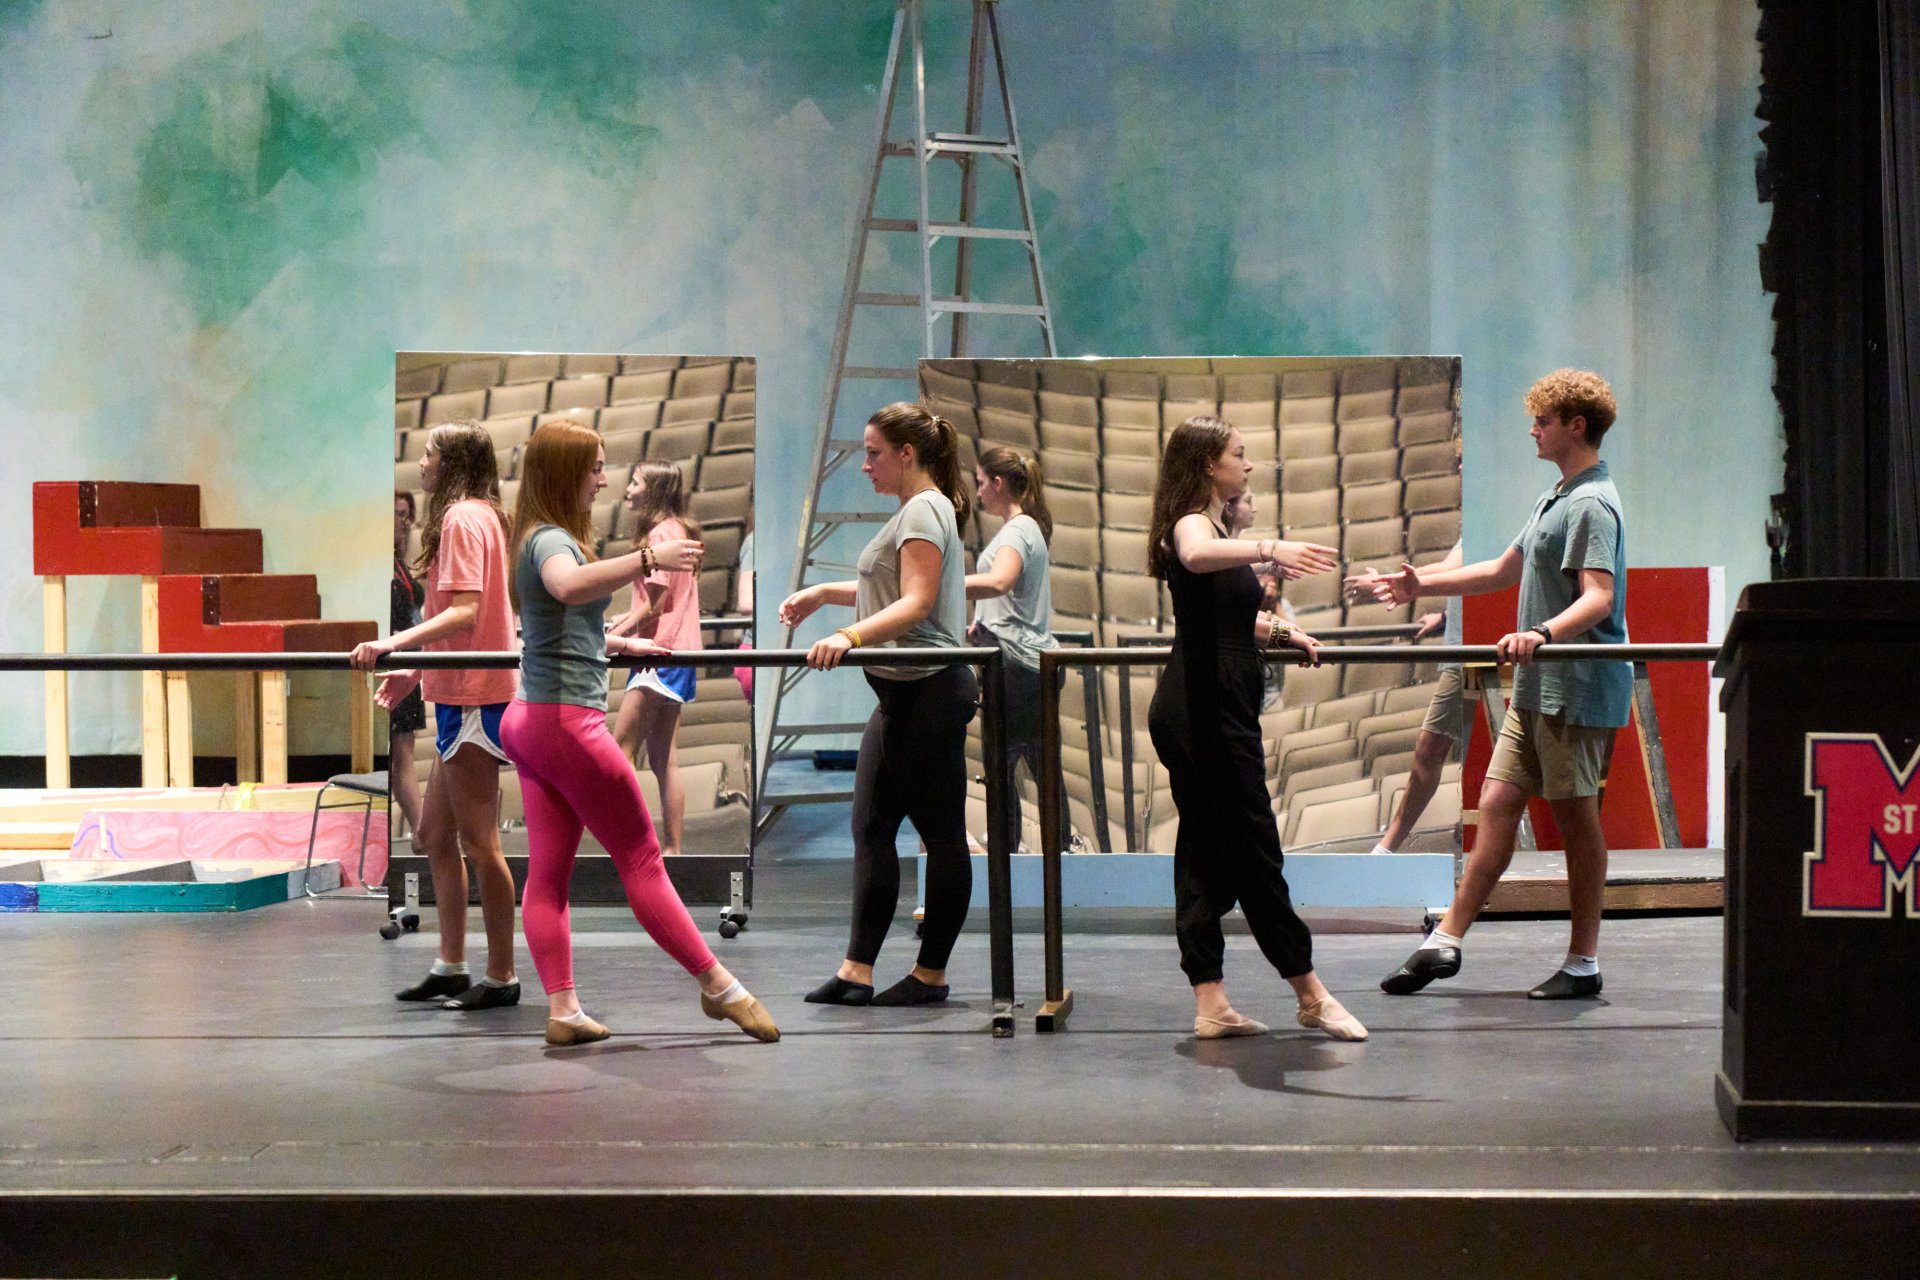 Students Explore Dance Through New Course Offering